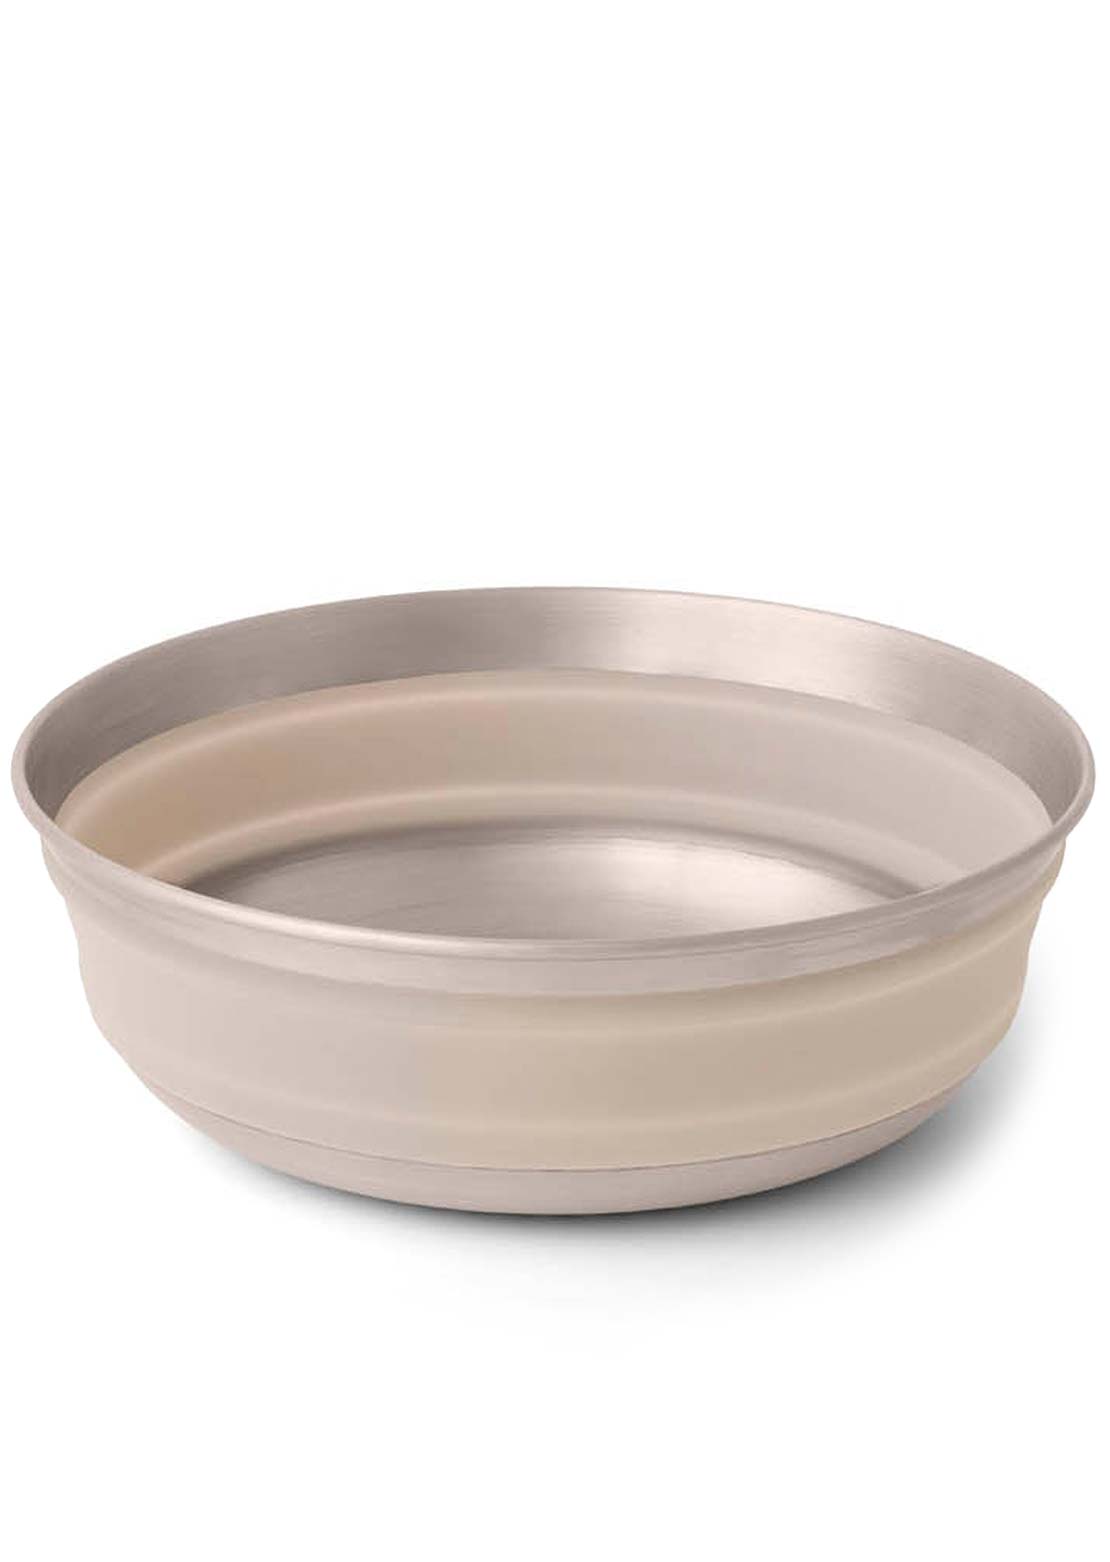 Sea To Summit Detour Stainless Steel Bowl Moonstruck Grey